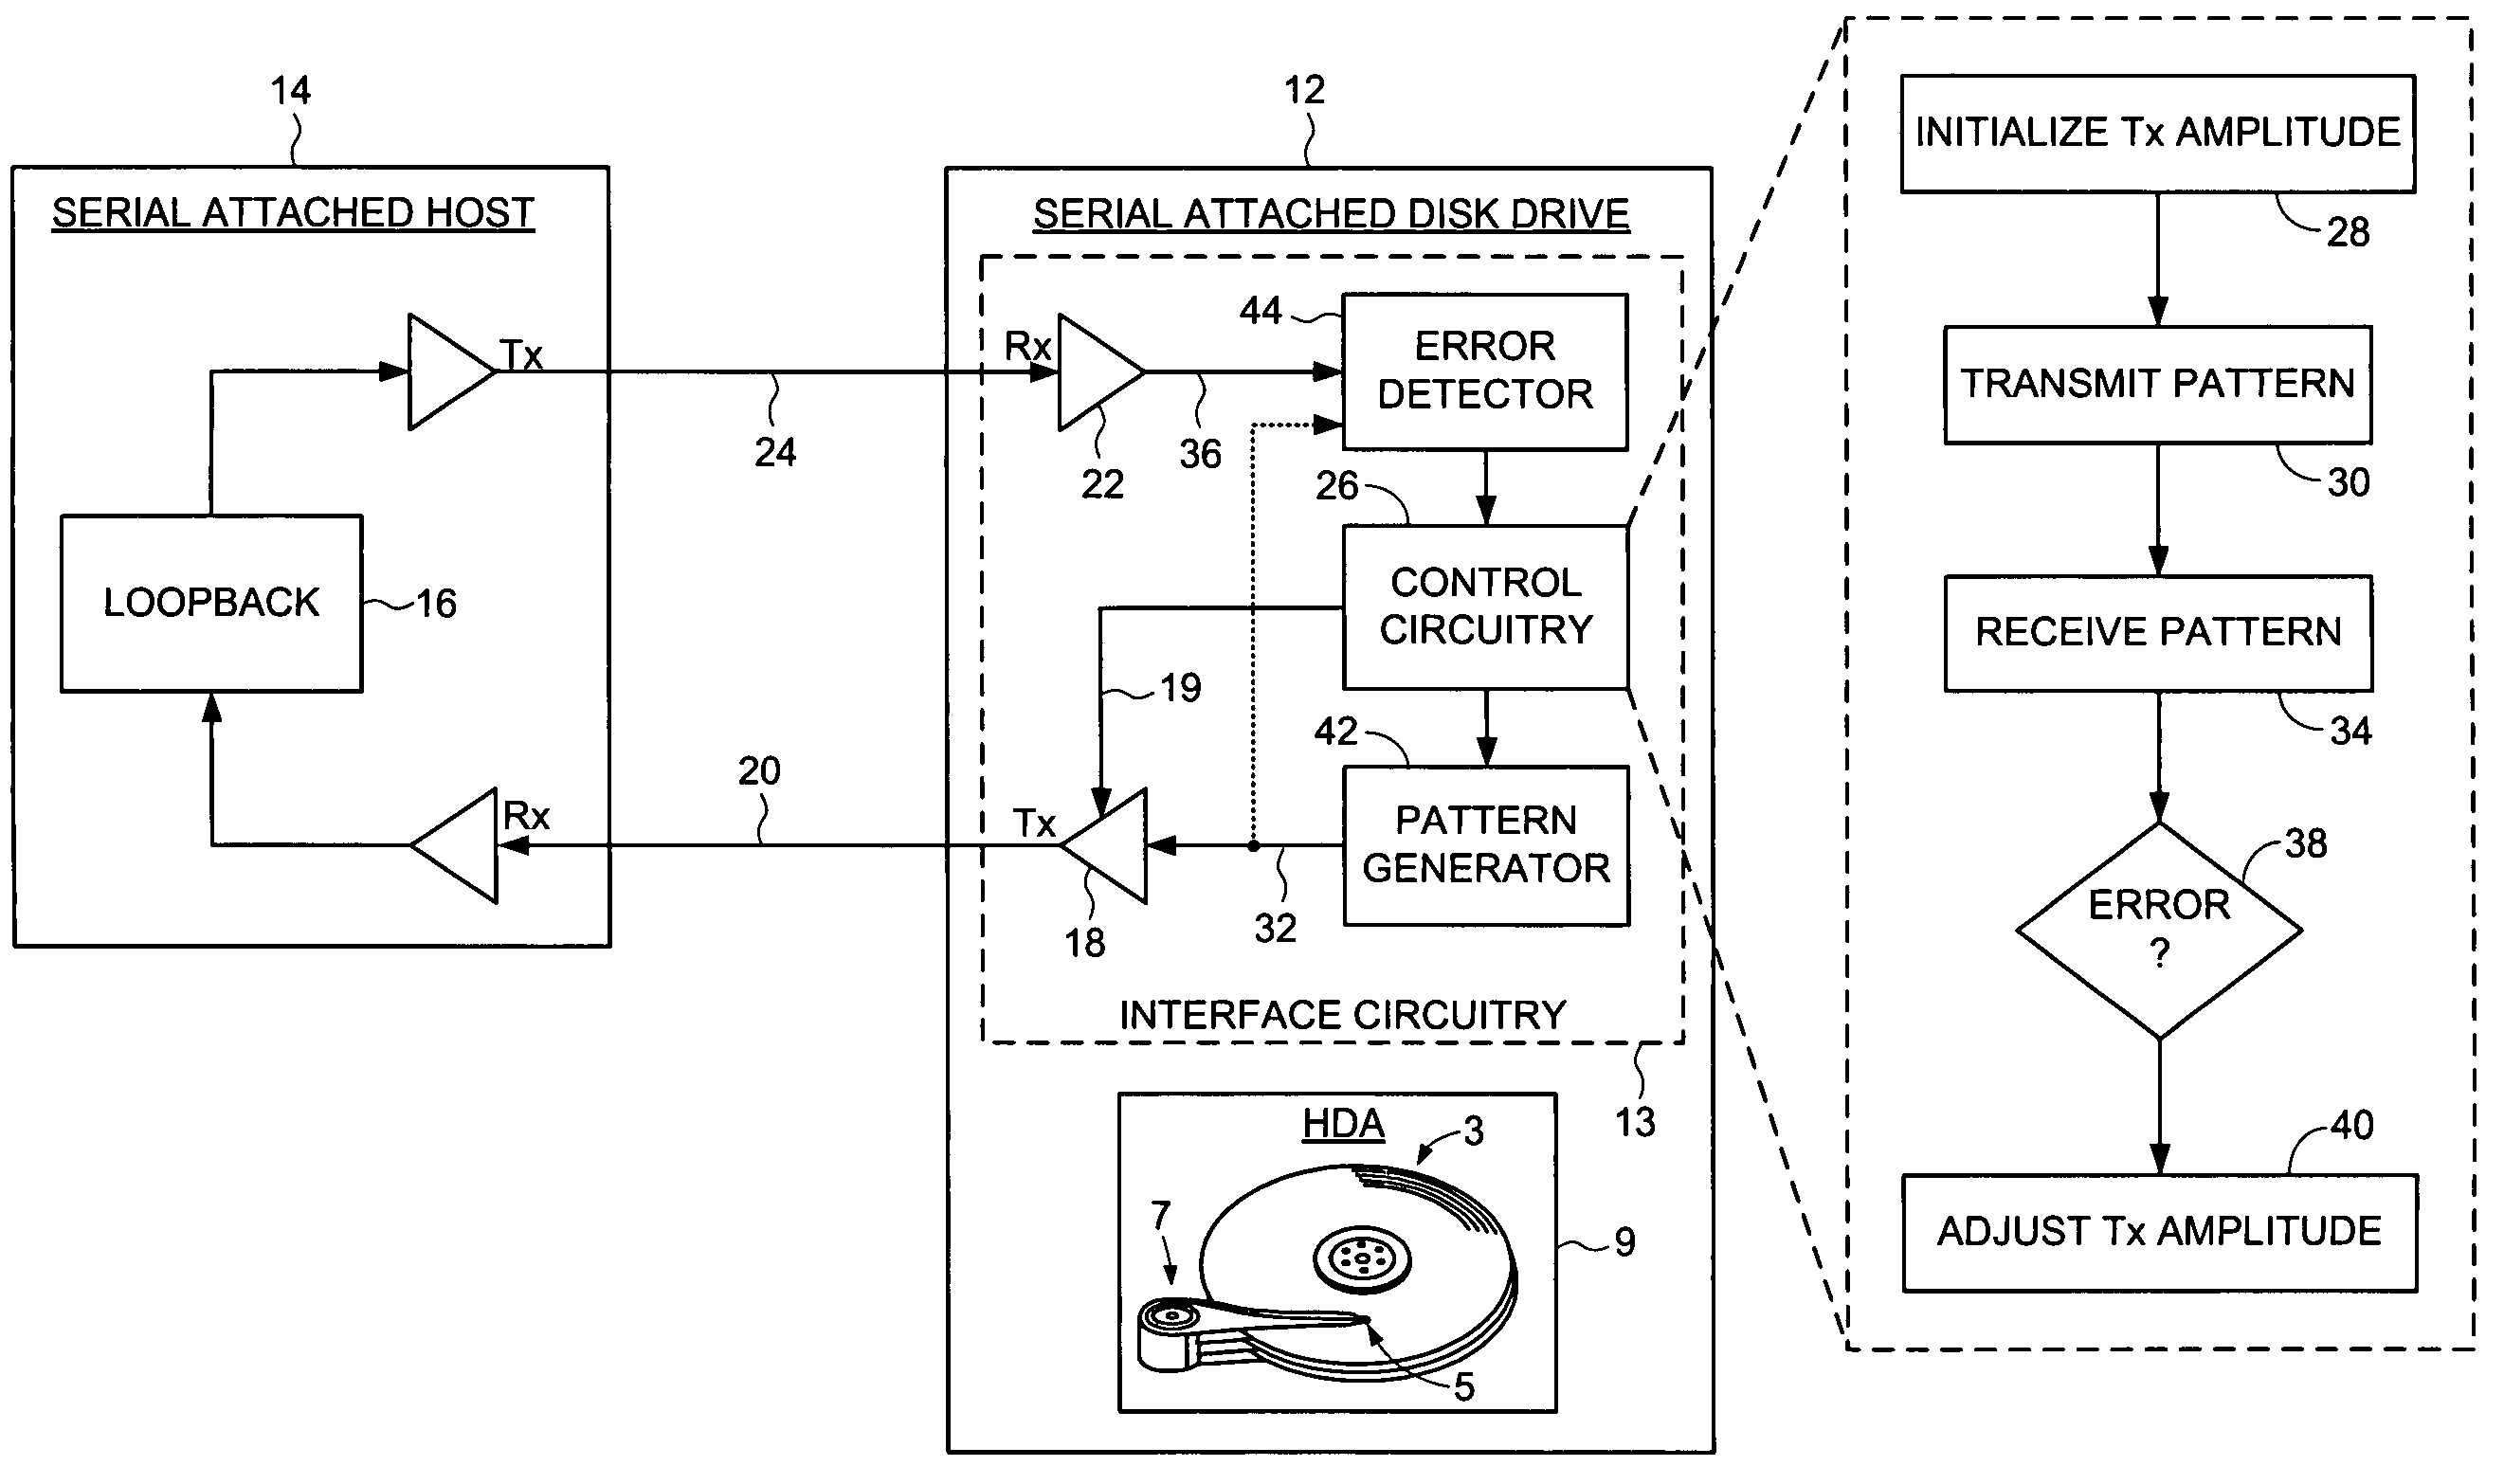 Disk drive using loopback to calibrate transmission amplitude